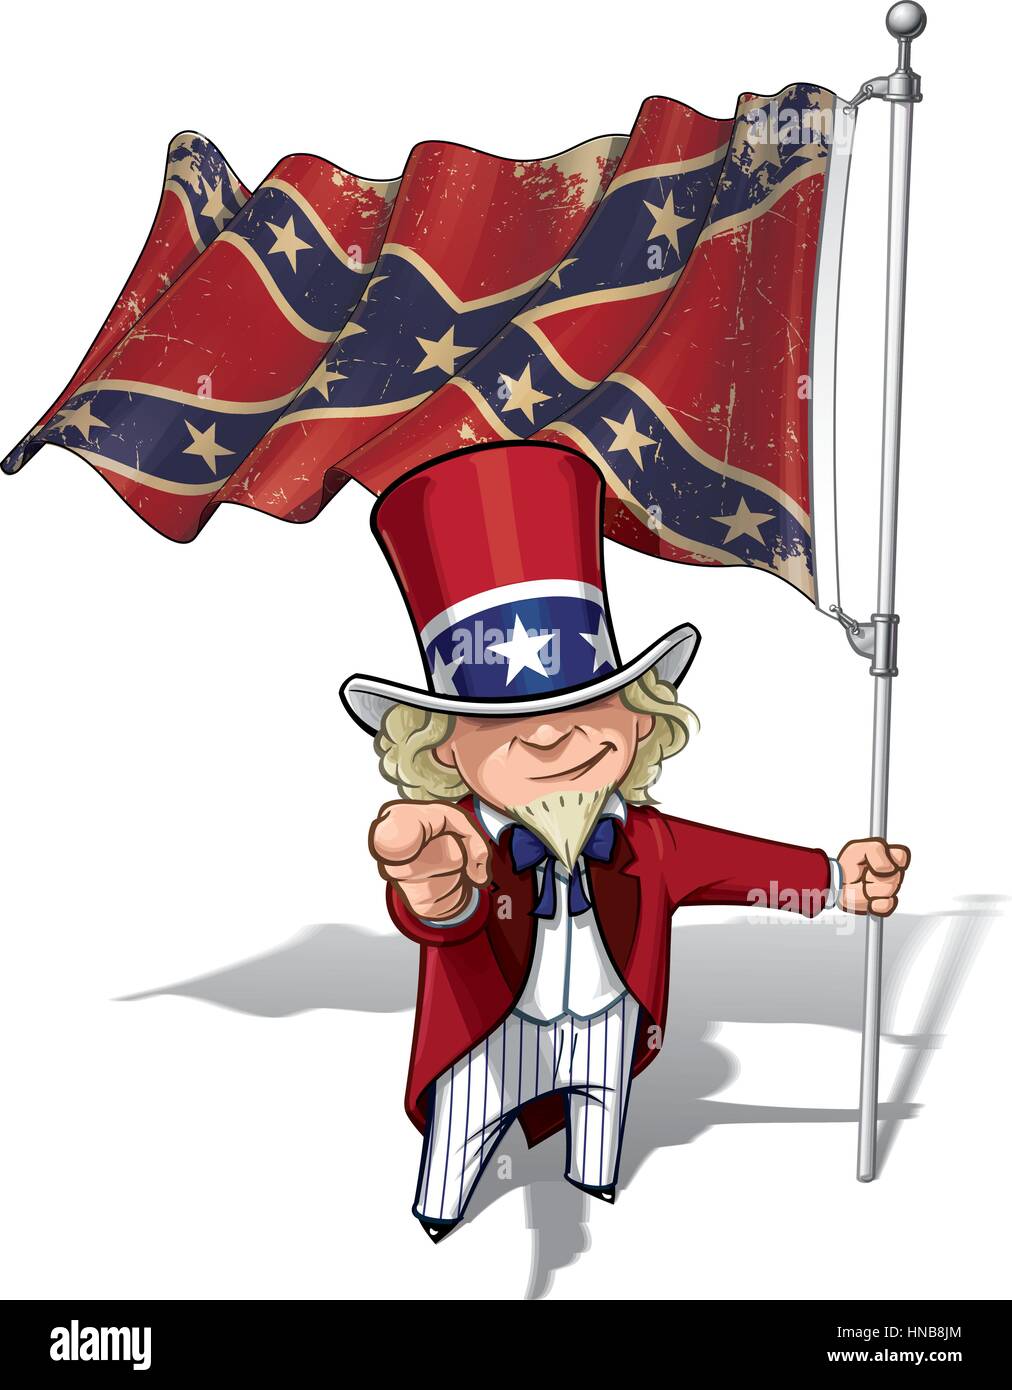 Vector Cartoon Illustration of South Uncle Sam holding a waving a American civil war South Flag (Stars and Bars), pointing 'I want you'. Flag's textur Stock Vector